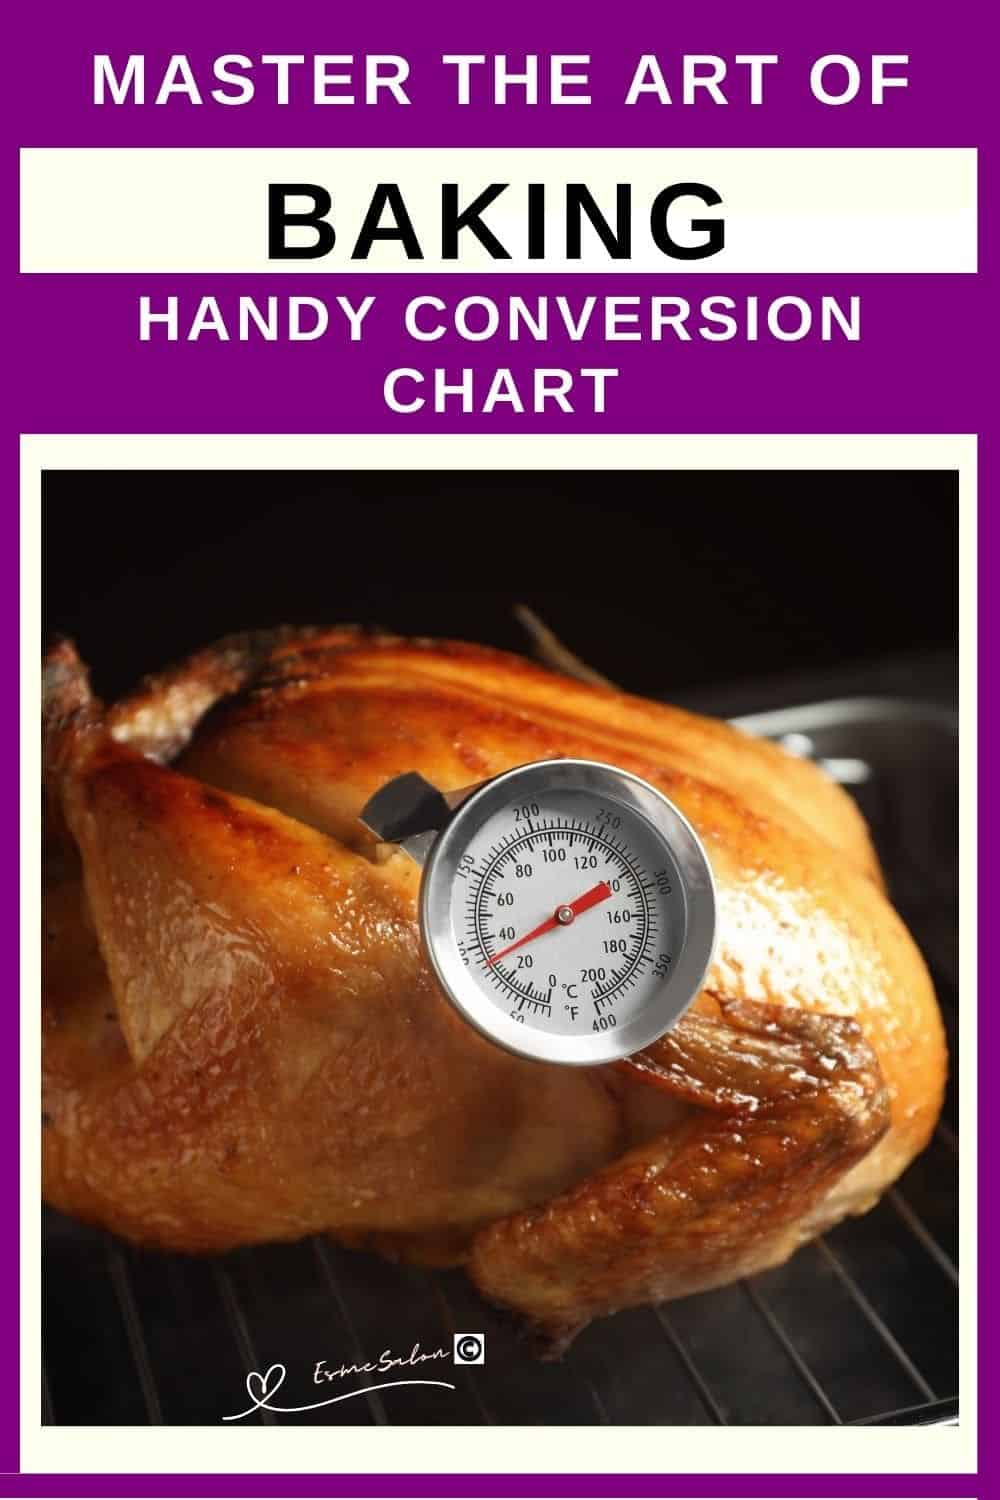 an image of a roasted chicken with a oven thermometer